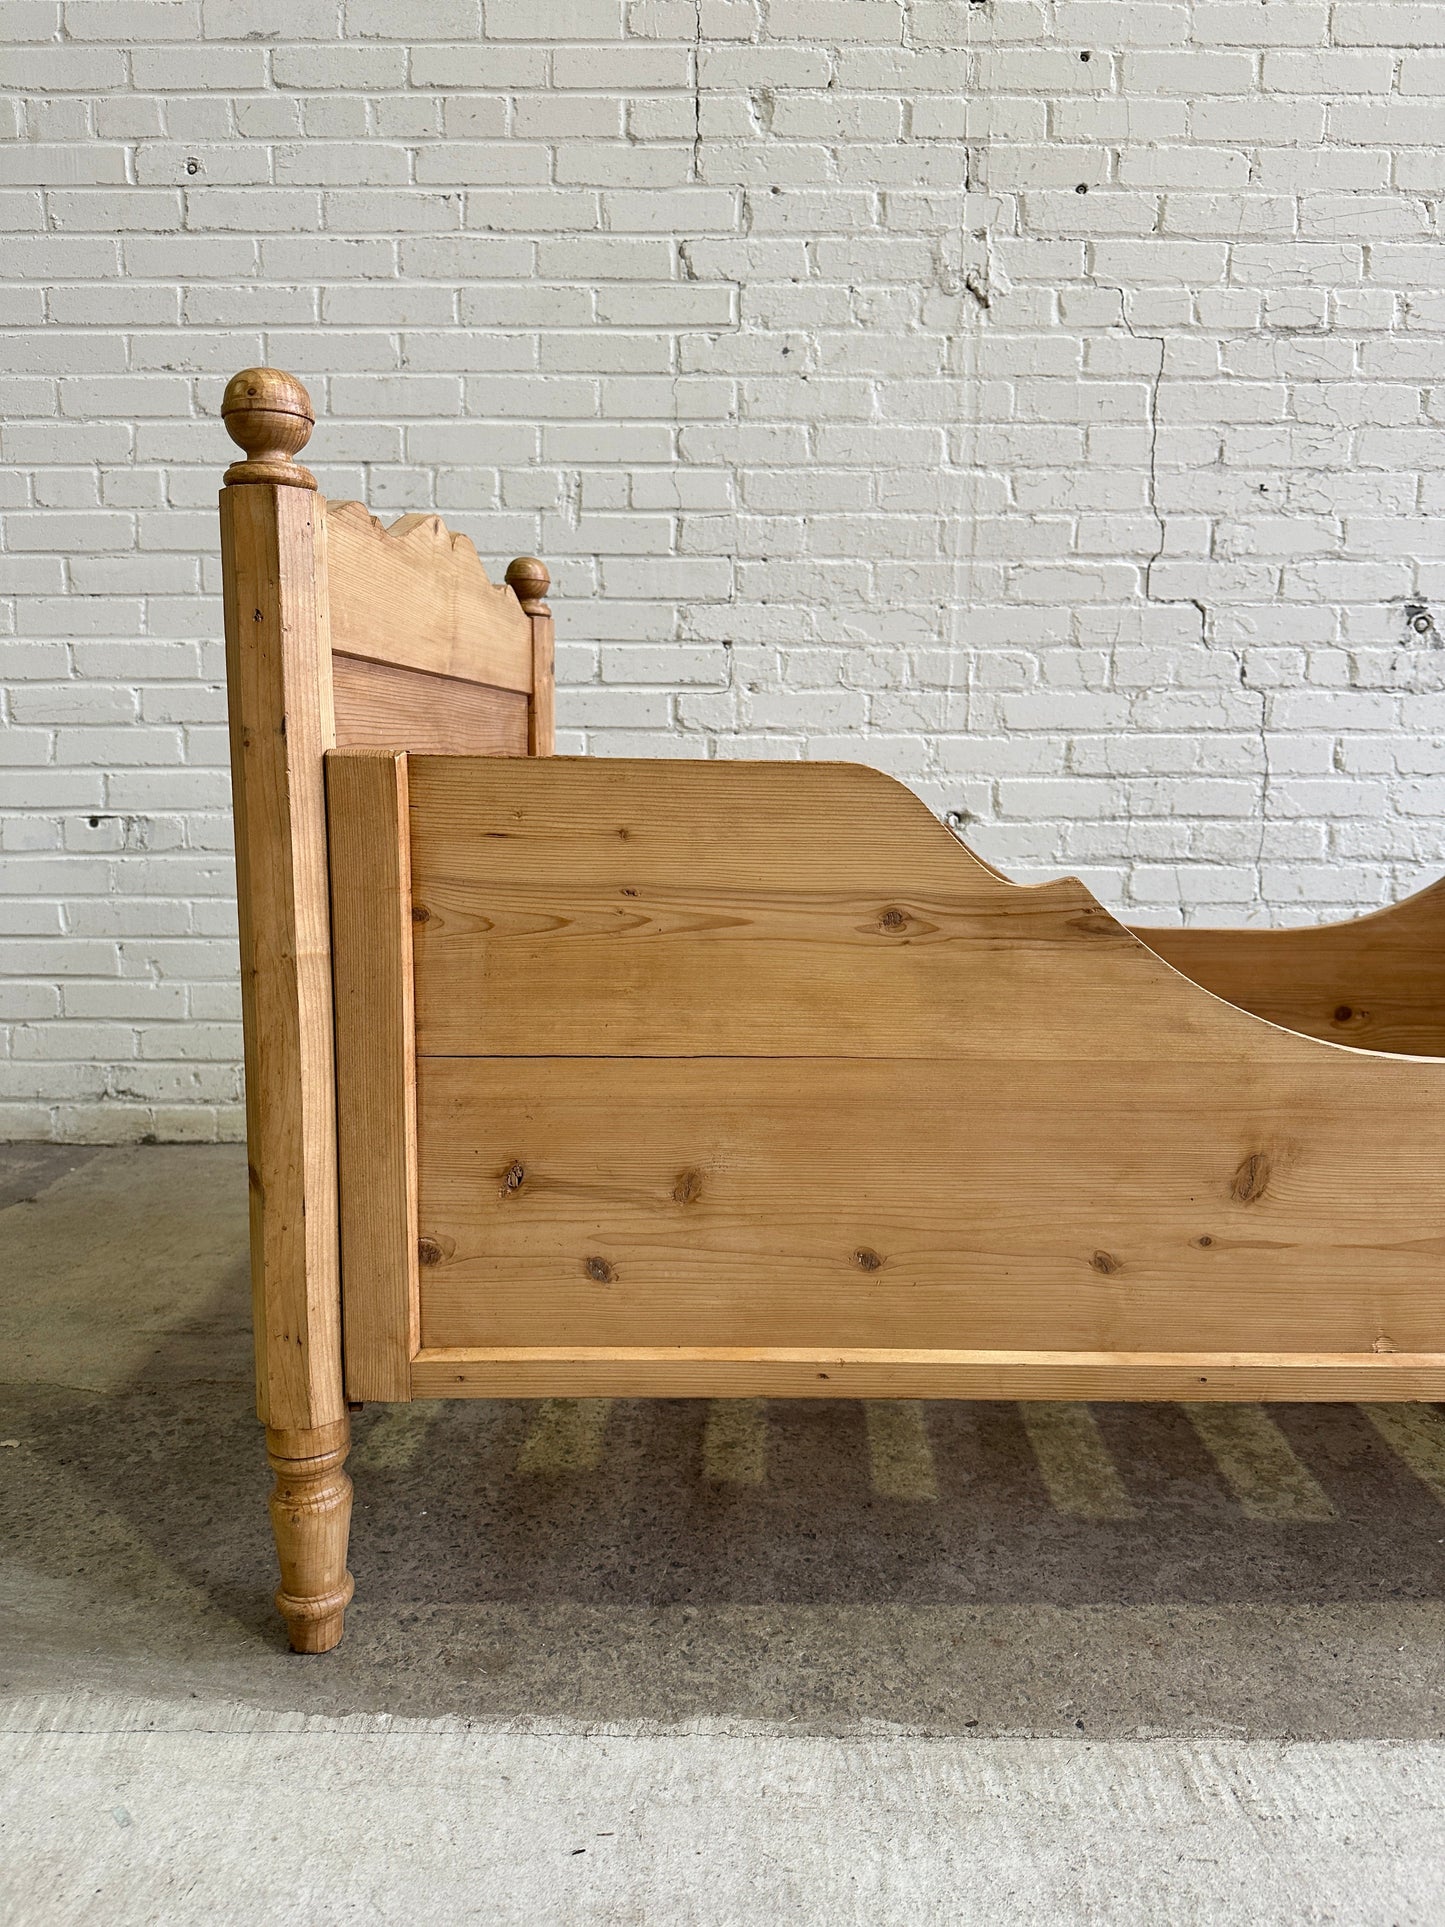 Antique Pine Sleigh Bed with Shaped Siderails, c. 1890